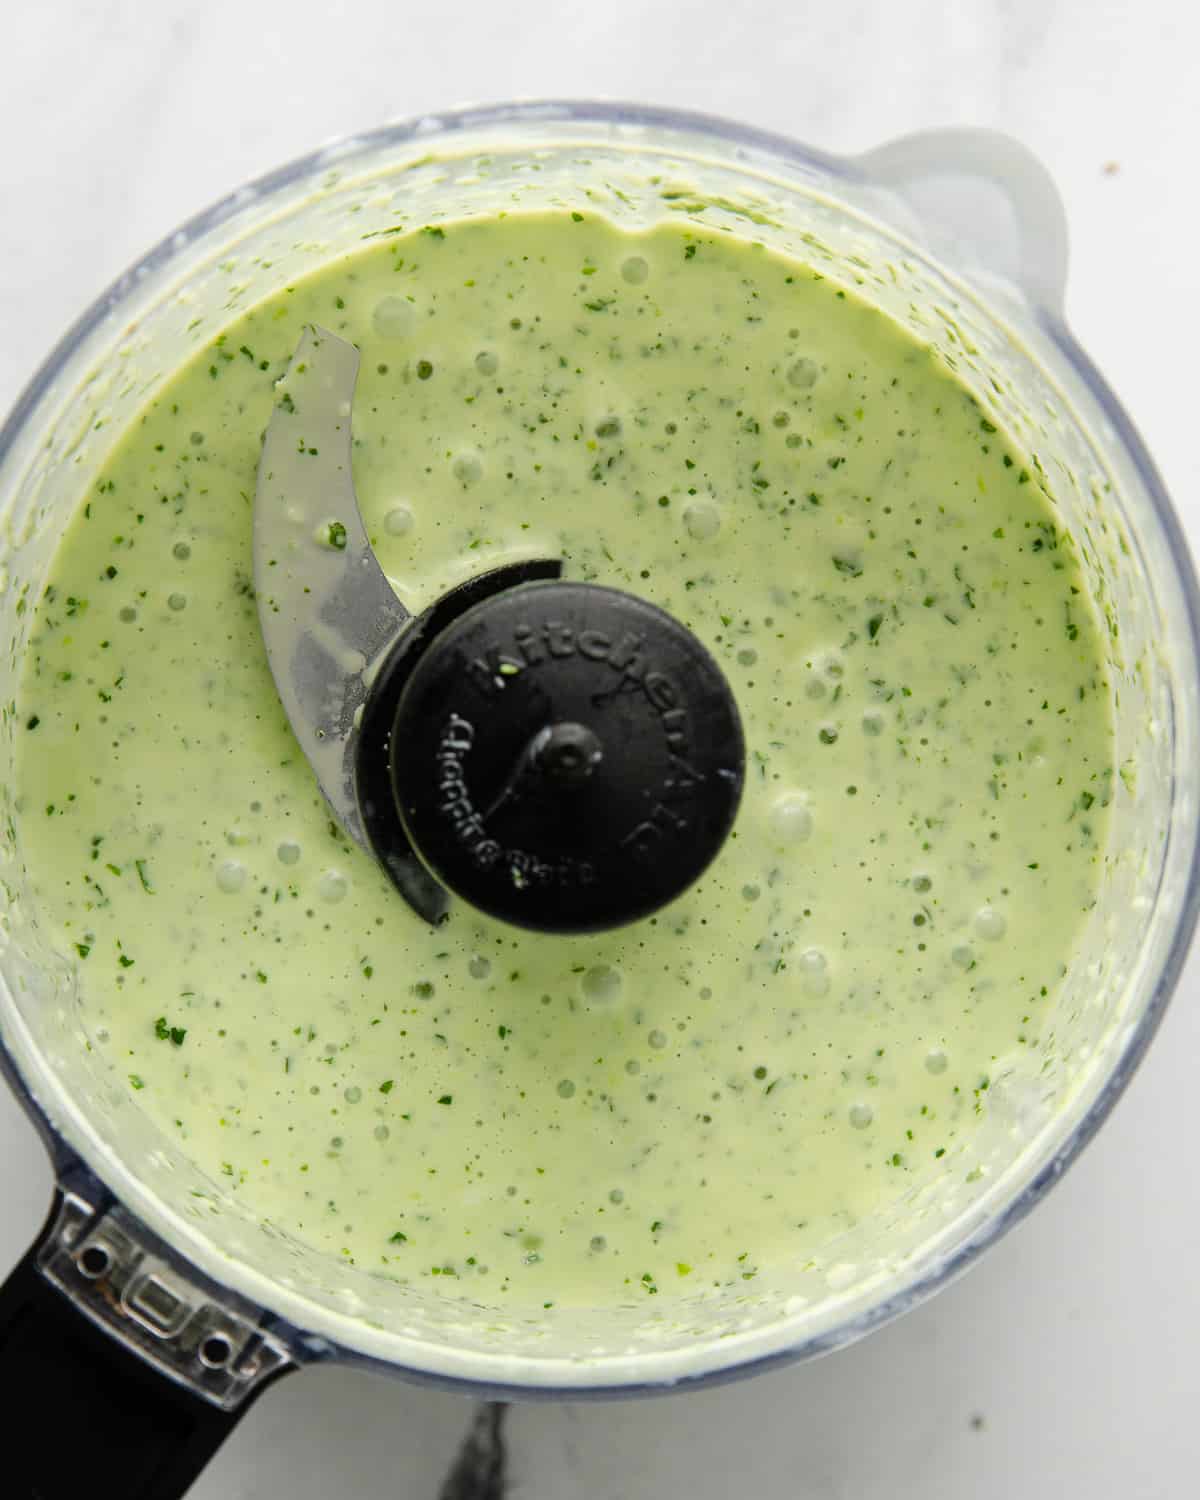 Blended cilantro garlic sauce in a food processor.